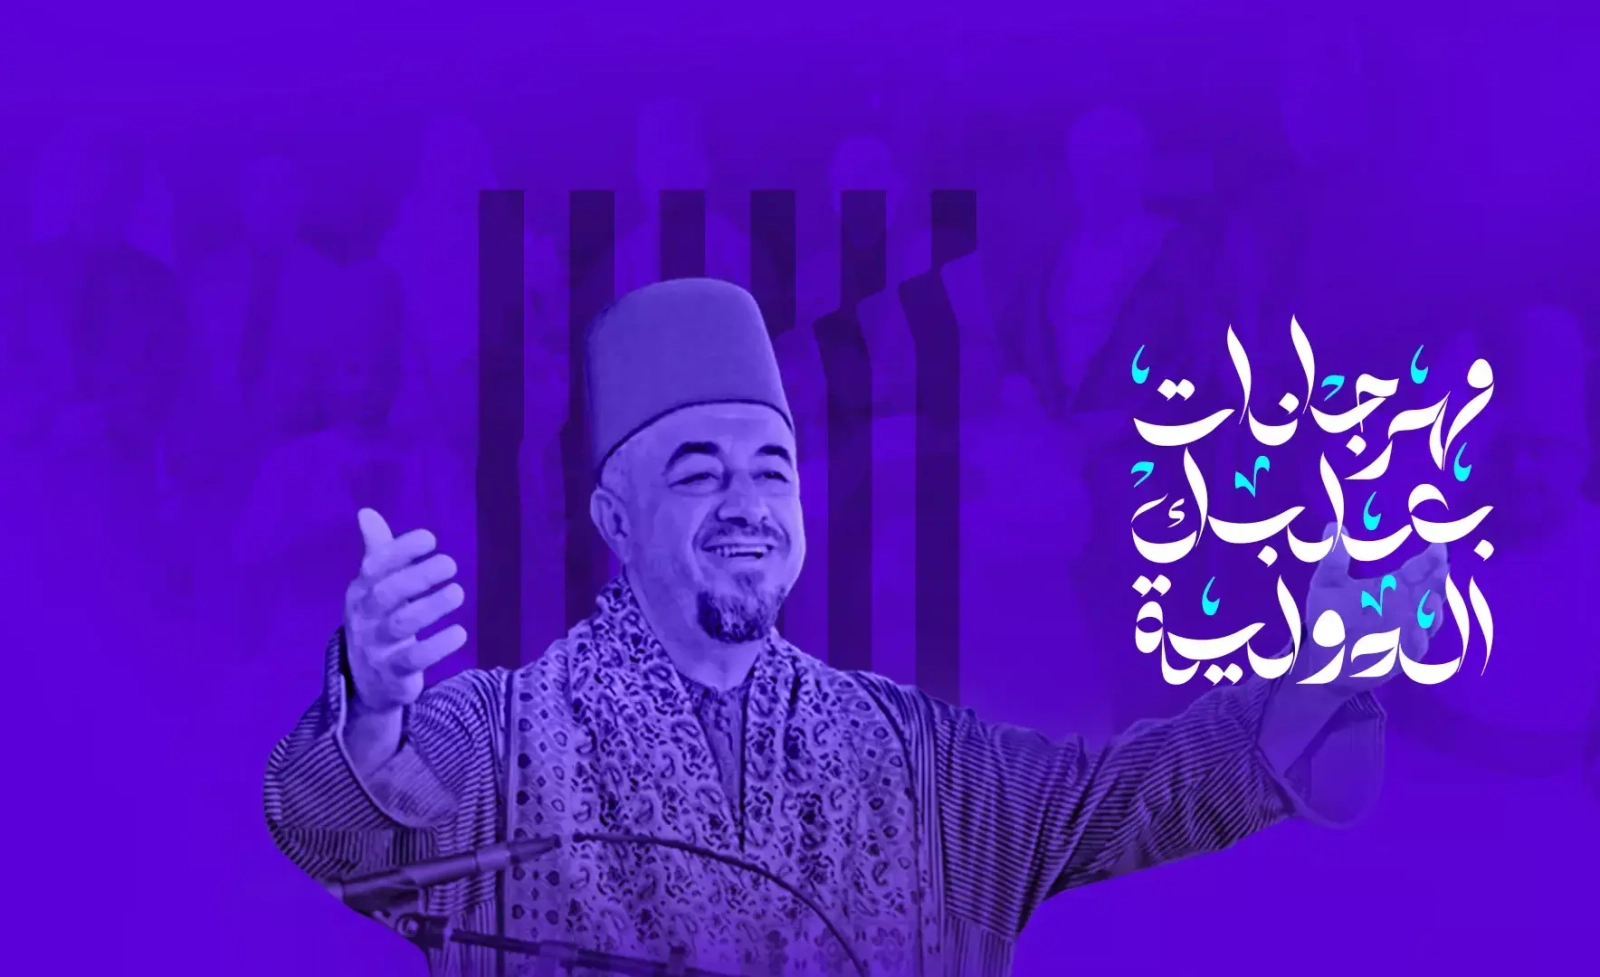 THE AL-KINDI ENSEMBLE WITH SHEIKH HAMED DAOUD AND THE DAMASCUS WHIRLING DERVISHES